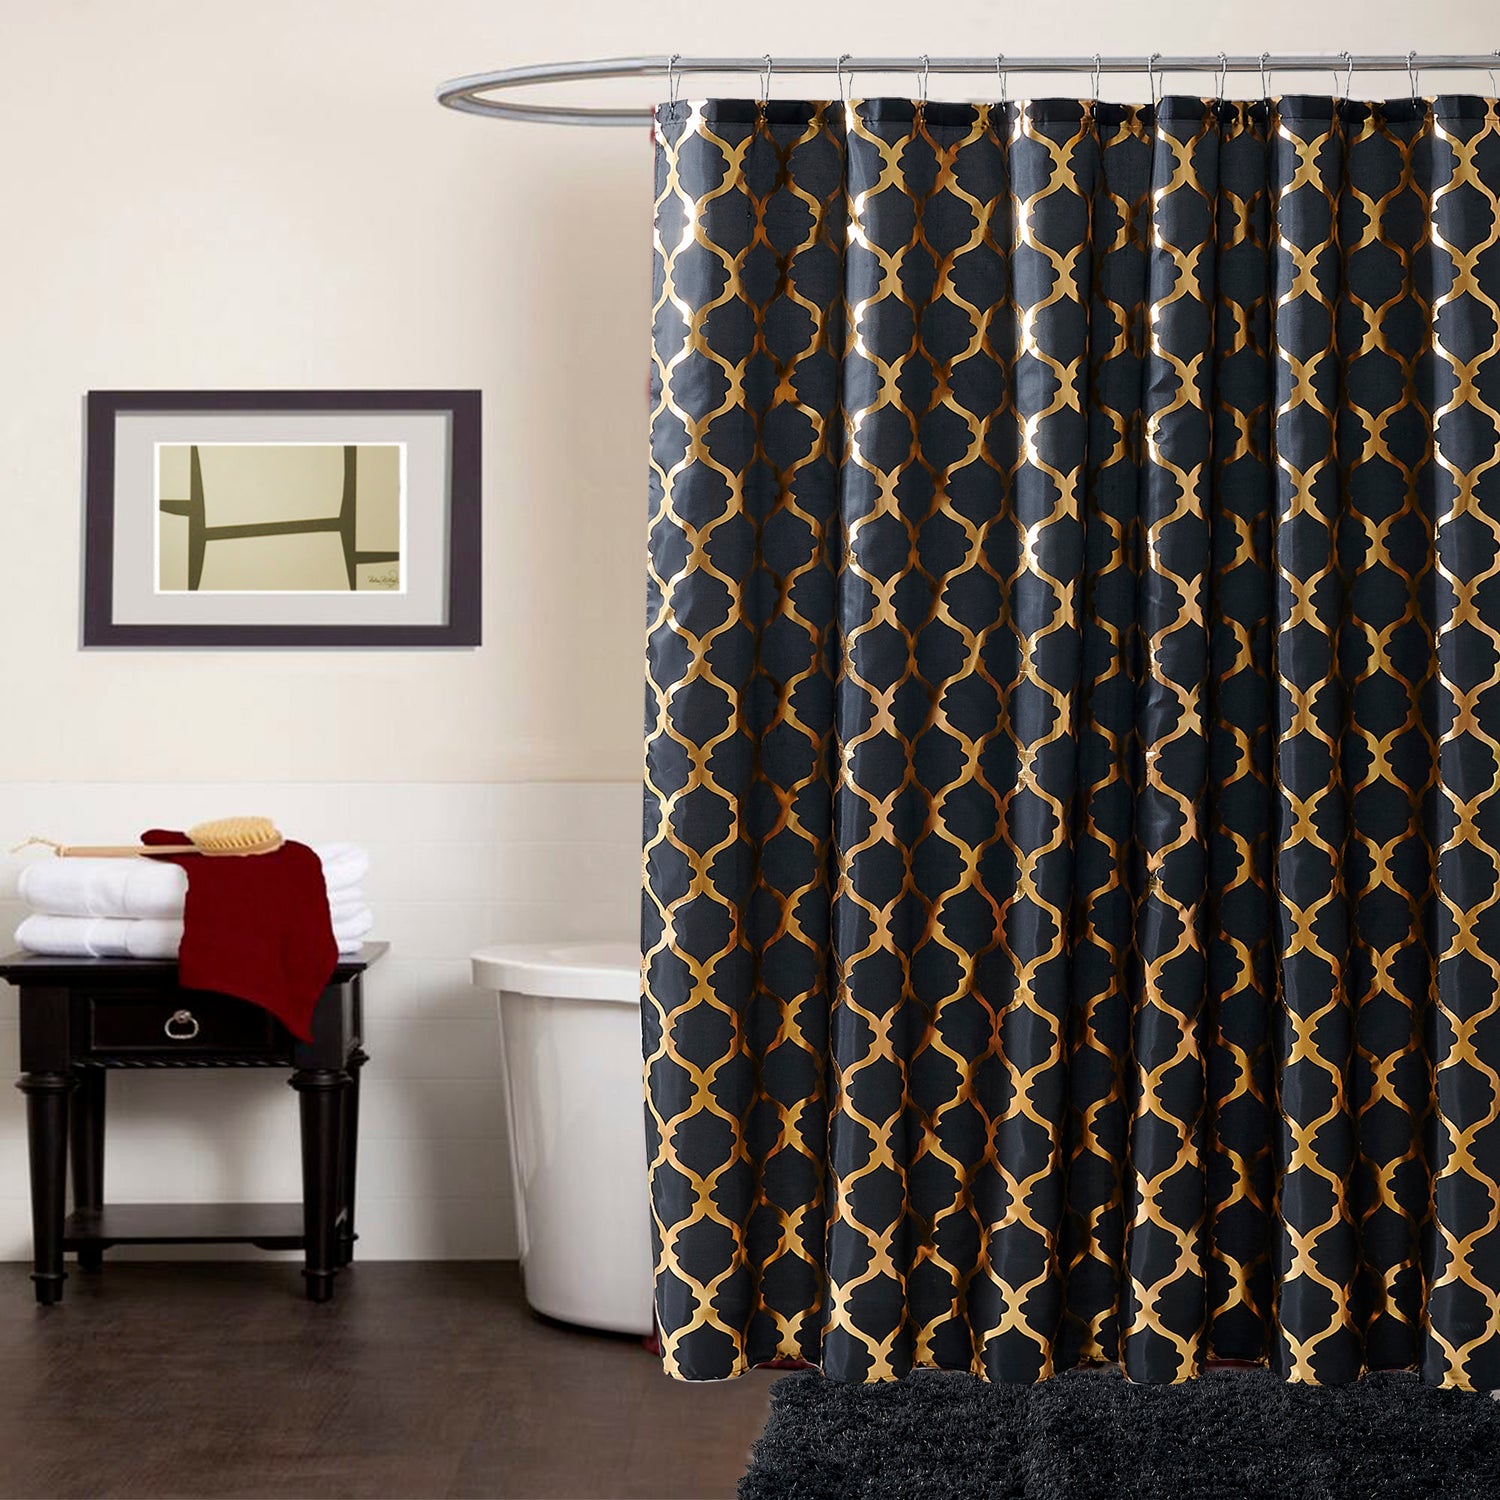 Discover the Hottest Trends in Shower Curtain Design - Spirit Linen